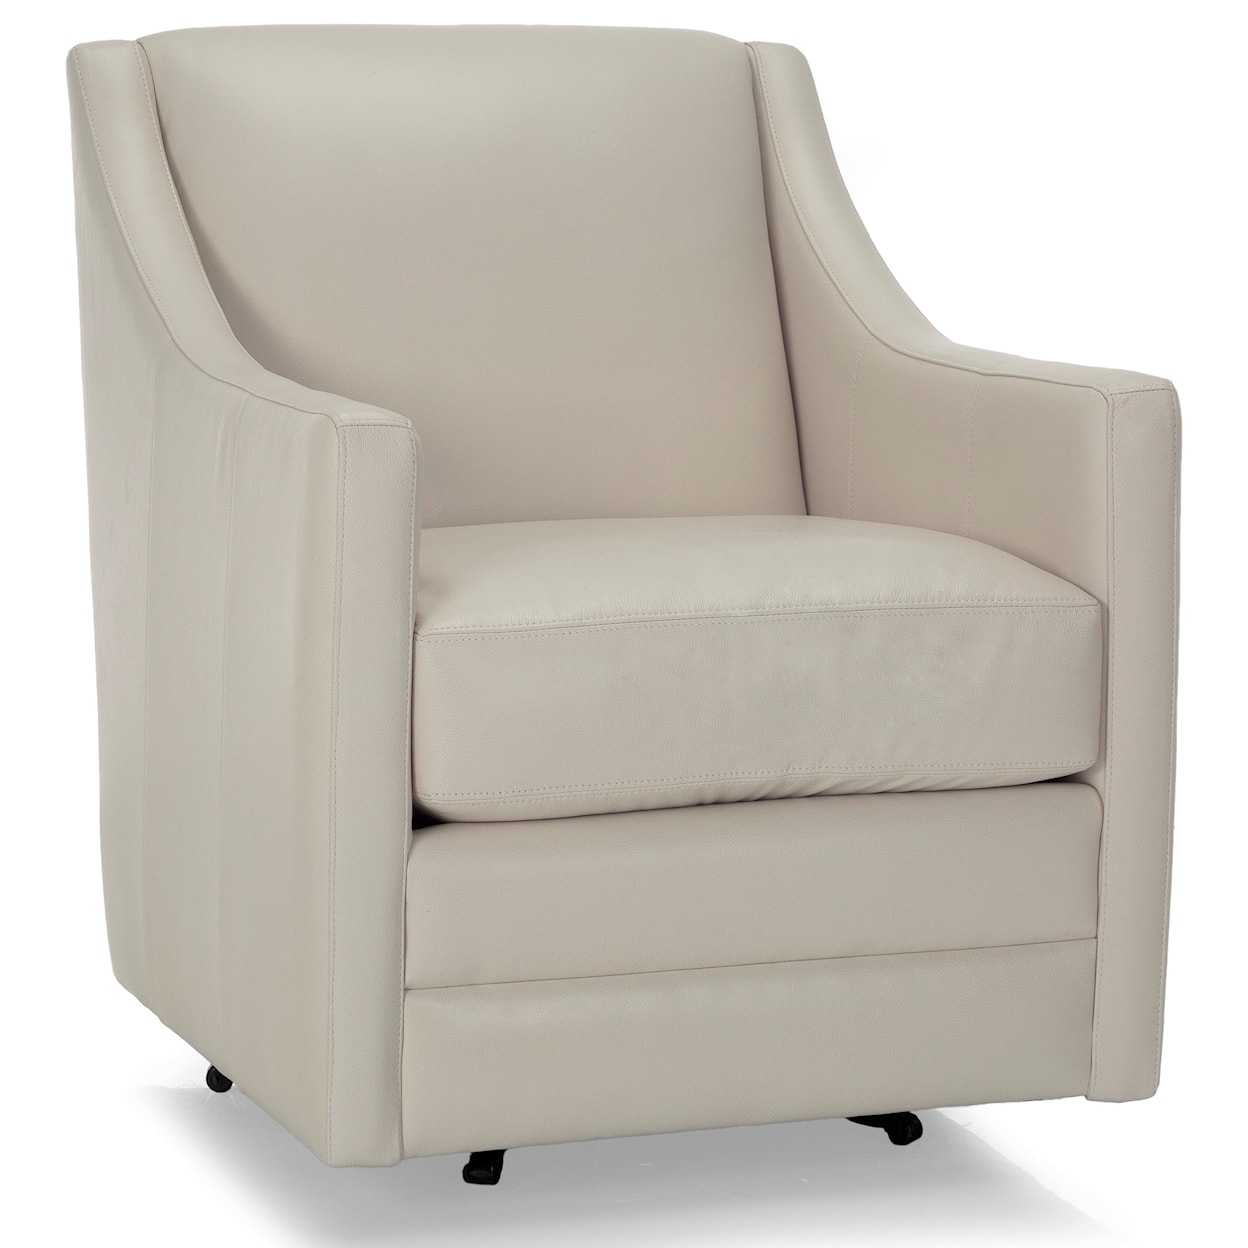 Taelor Designs Tracy Leather Swivel Chair